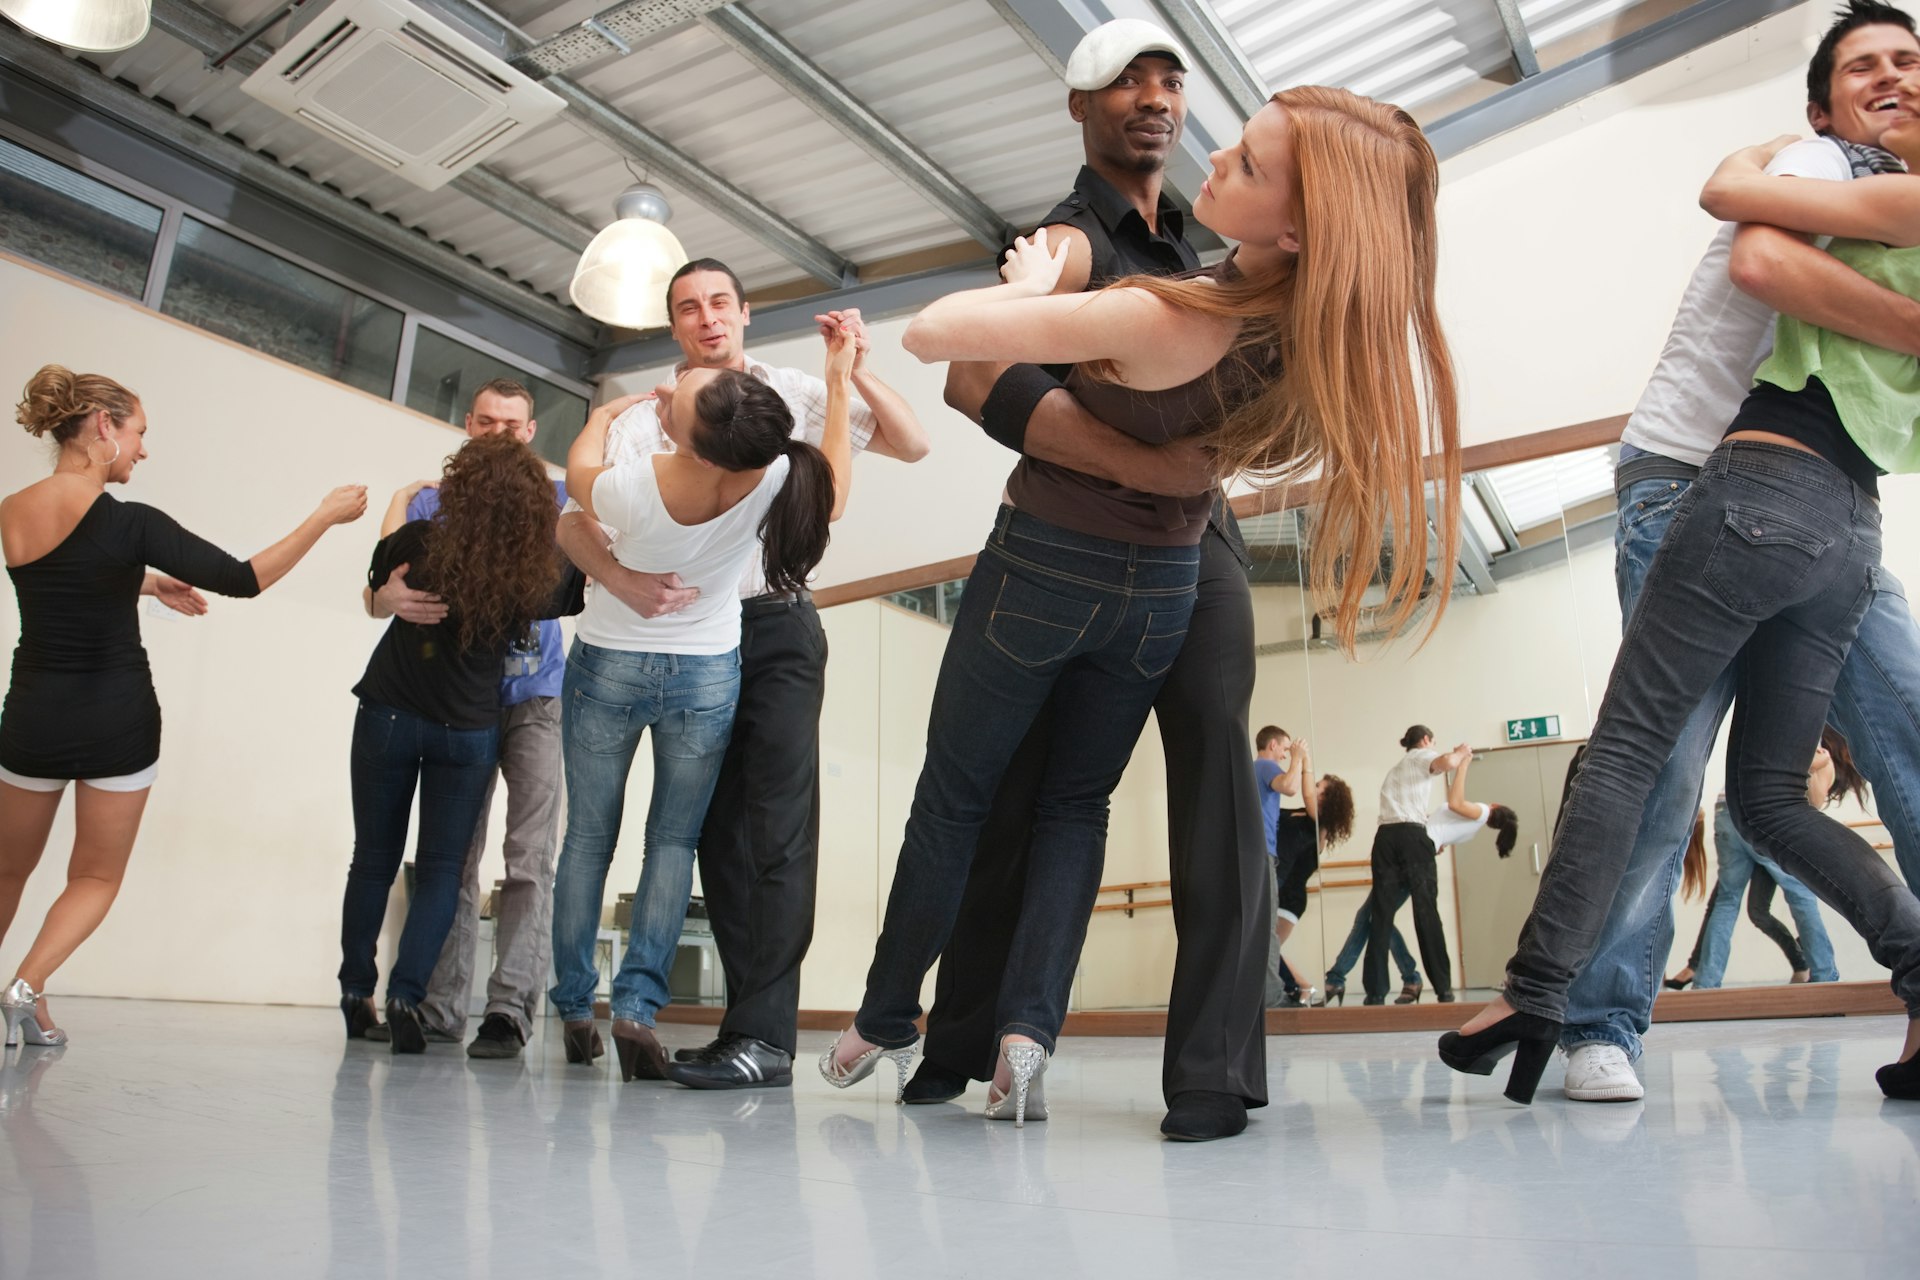 A group of people dance salsa during a class.